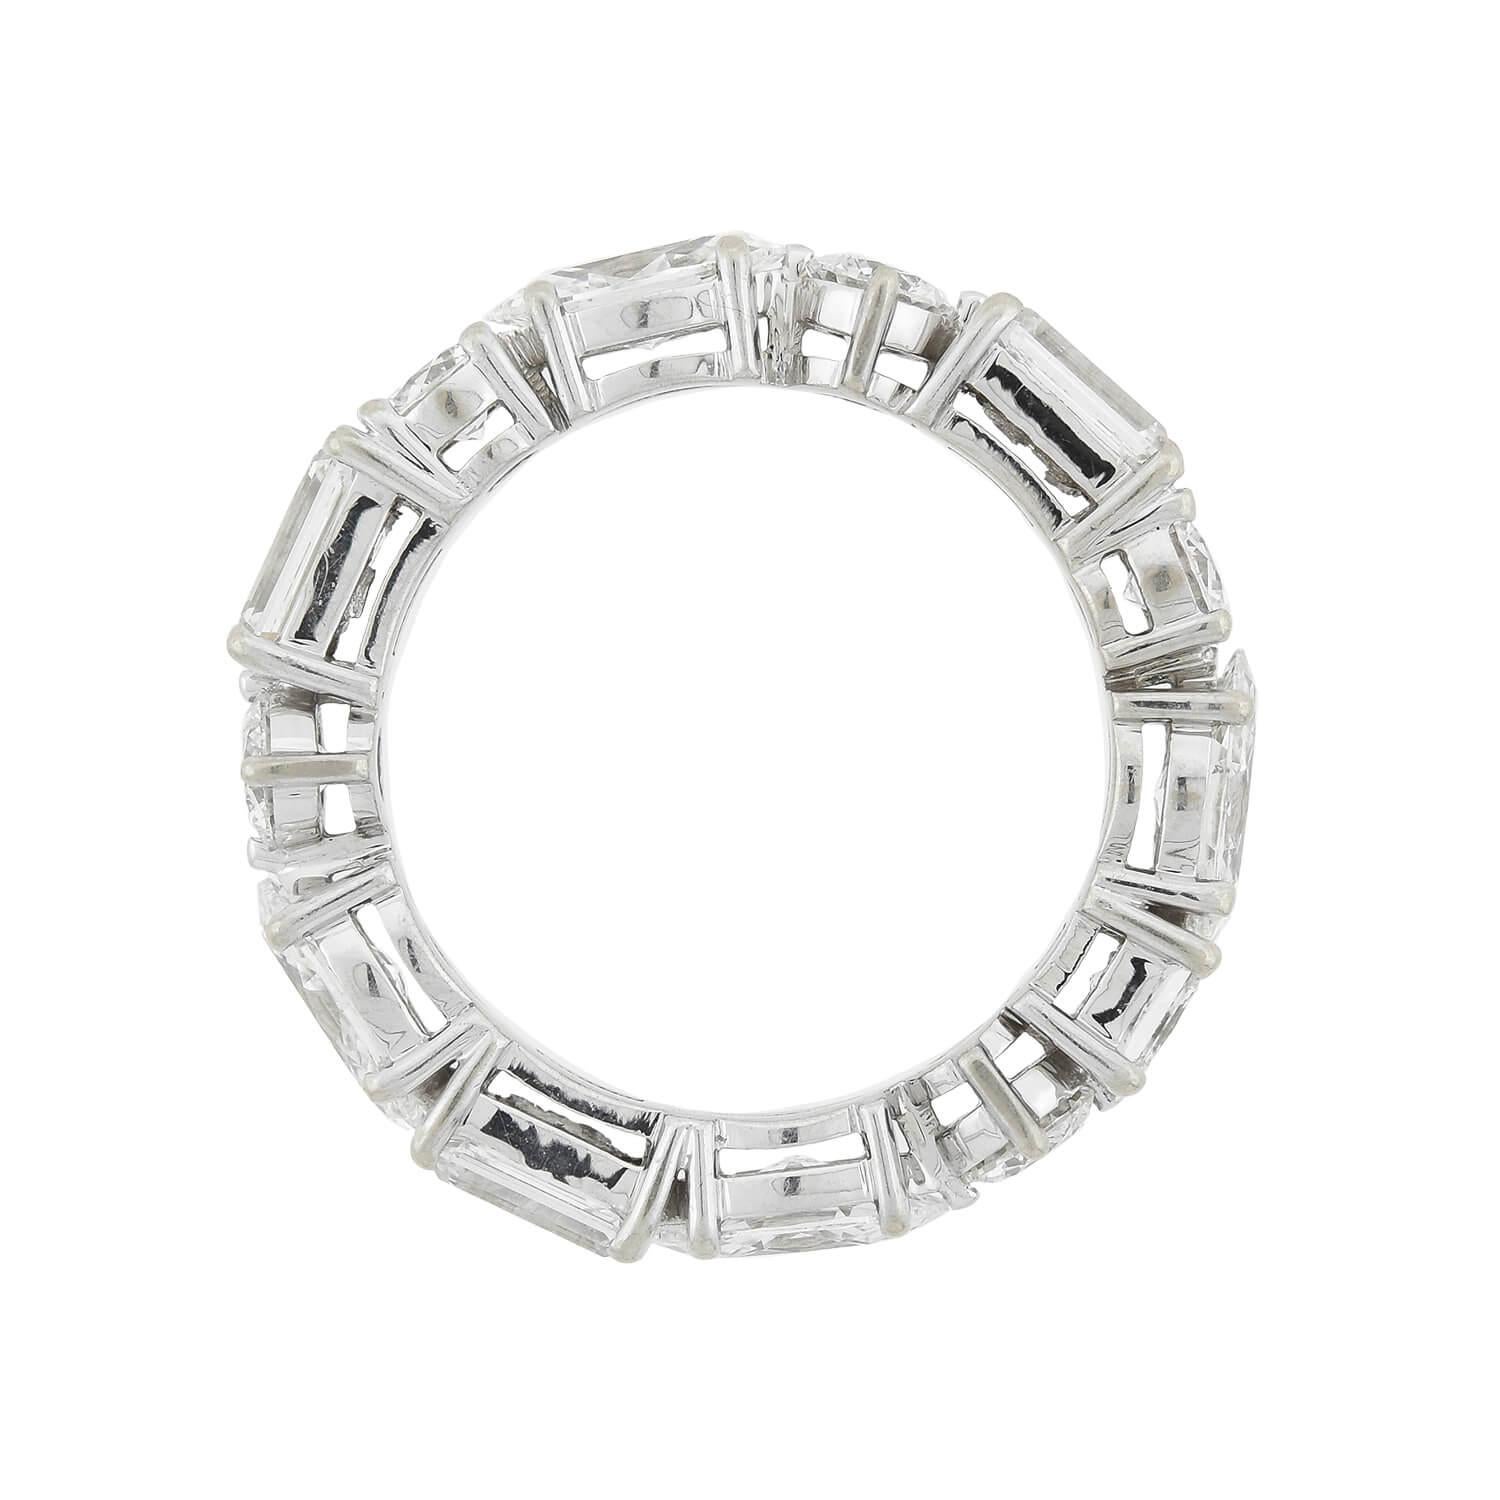 A gorgeous contemporary eternity band! Crafted in 14kt white gold, this ring features 3.75ctw of sparkling diamonds! Five Round, four Marquis, three Baguette, and a single Princess Cut diamond create a unique look as they encircle the band in their